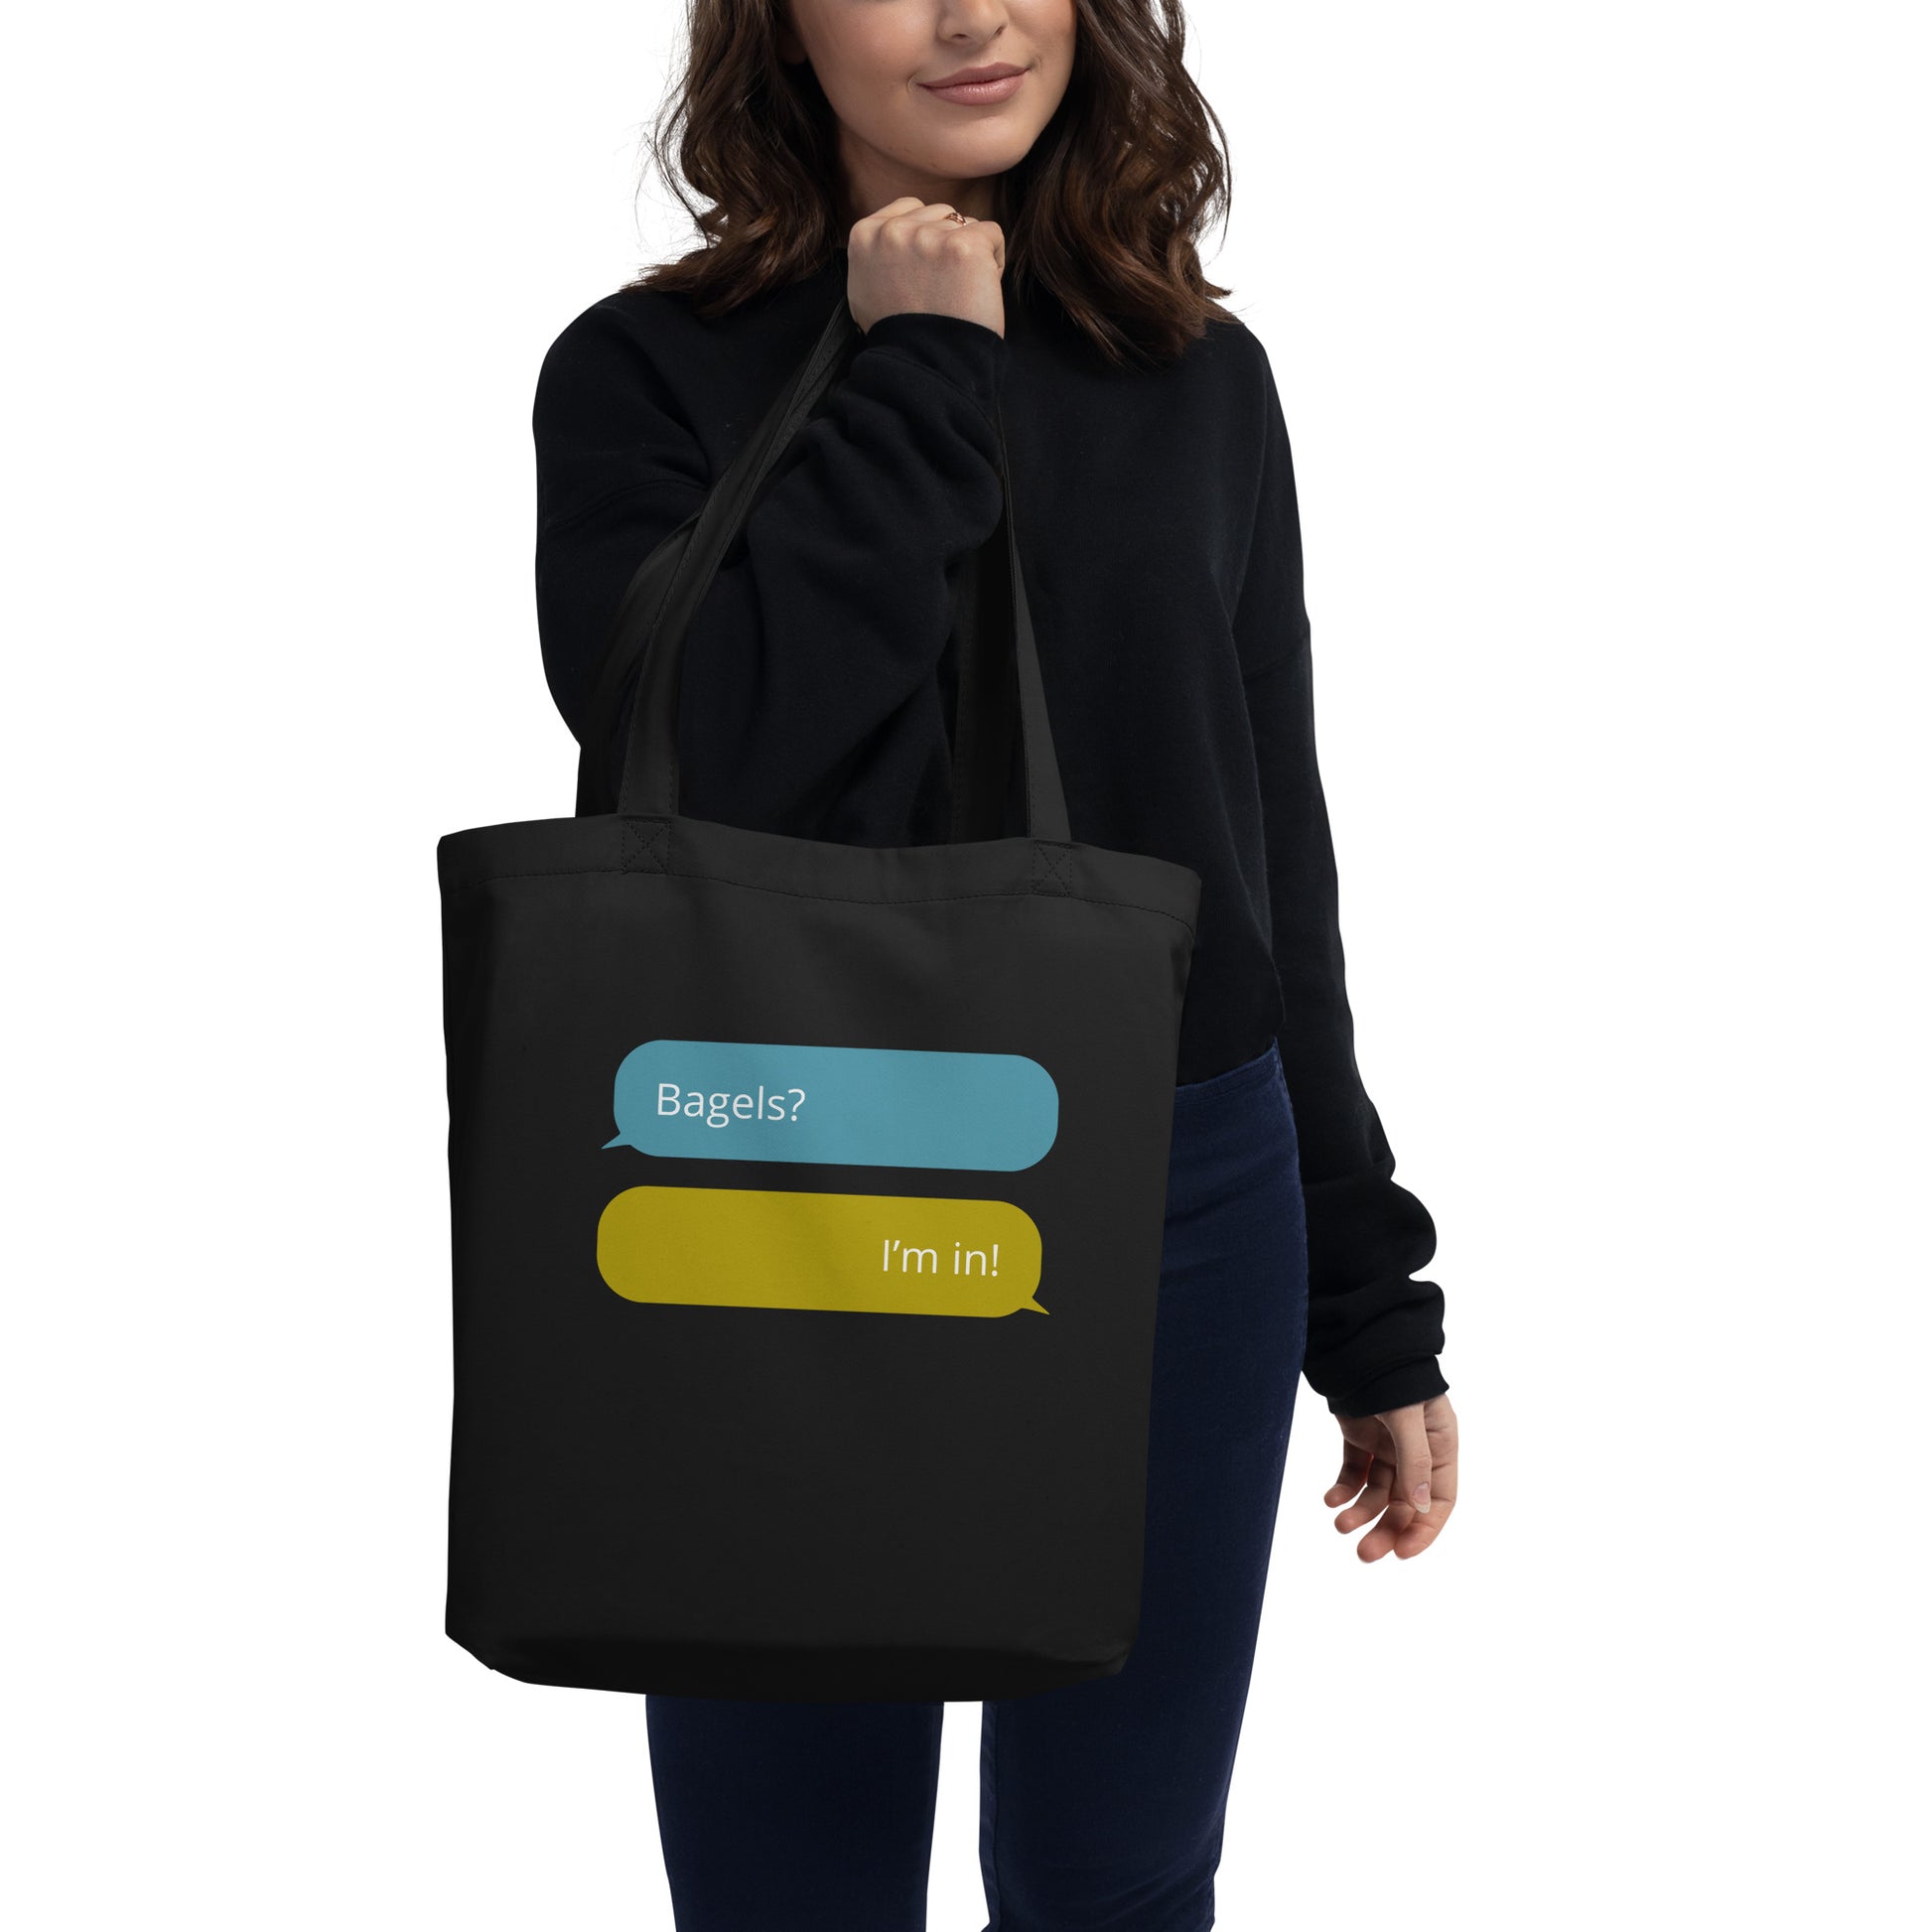 Woman holding a black cotton tote bagel with text message graphic that says Bages?, I'm in! 